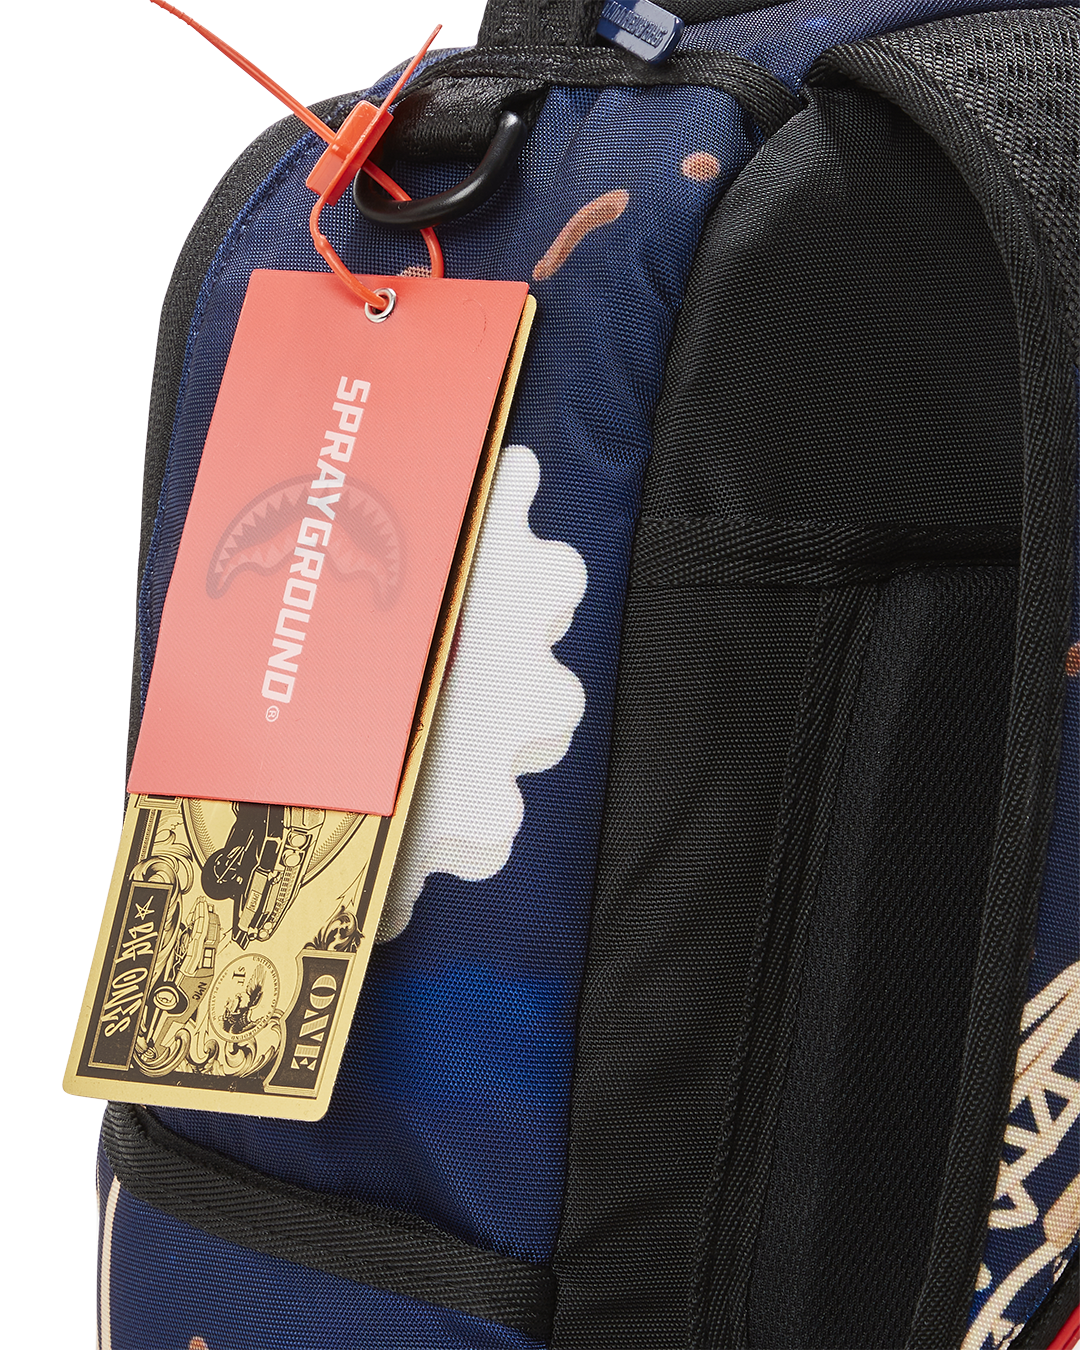 SPRAYGROUND NARUTO RAMEN BACKPACK NEW WITH TAGS OFFICIAL